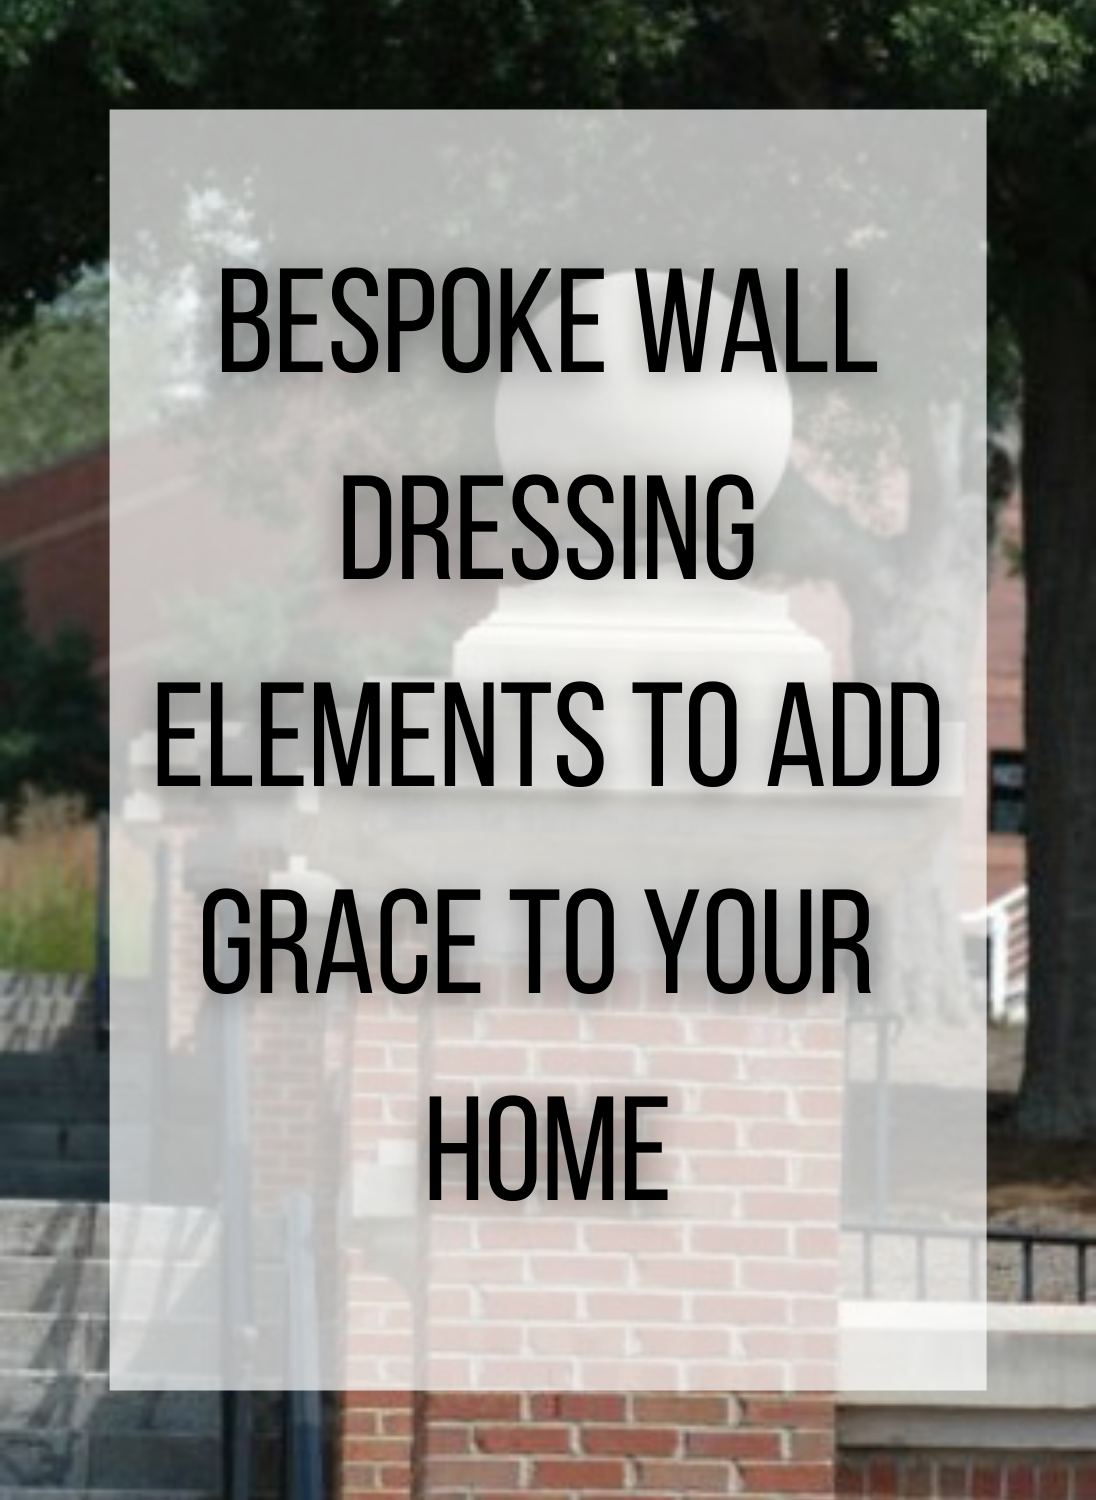 Bespoke wall dressing elements to add grace to your home